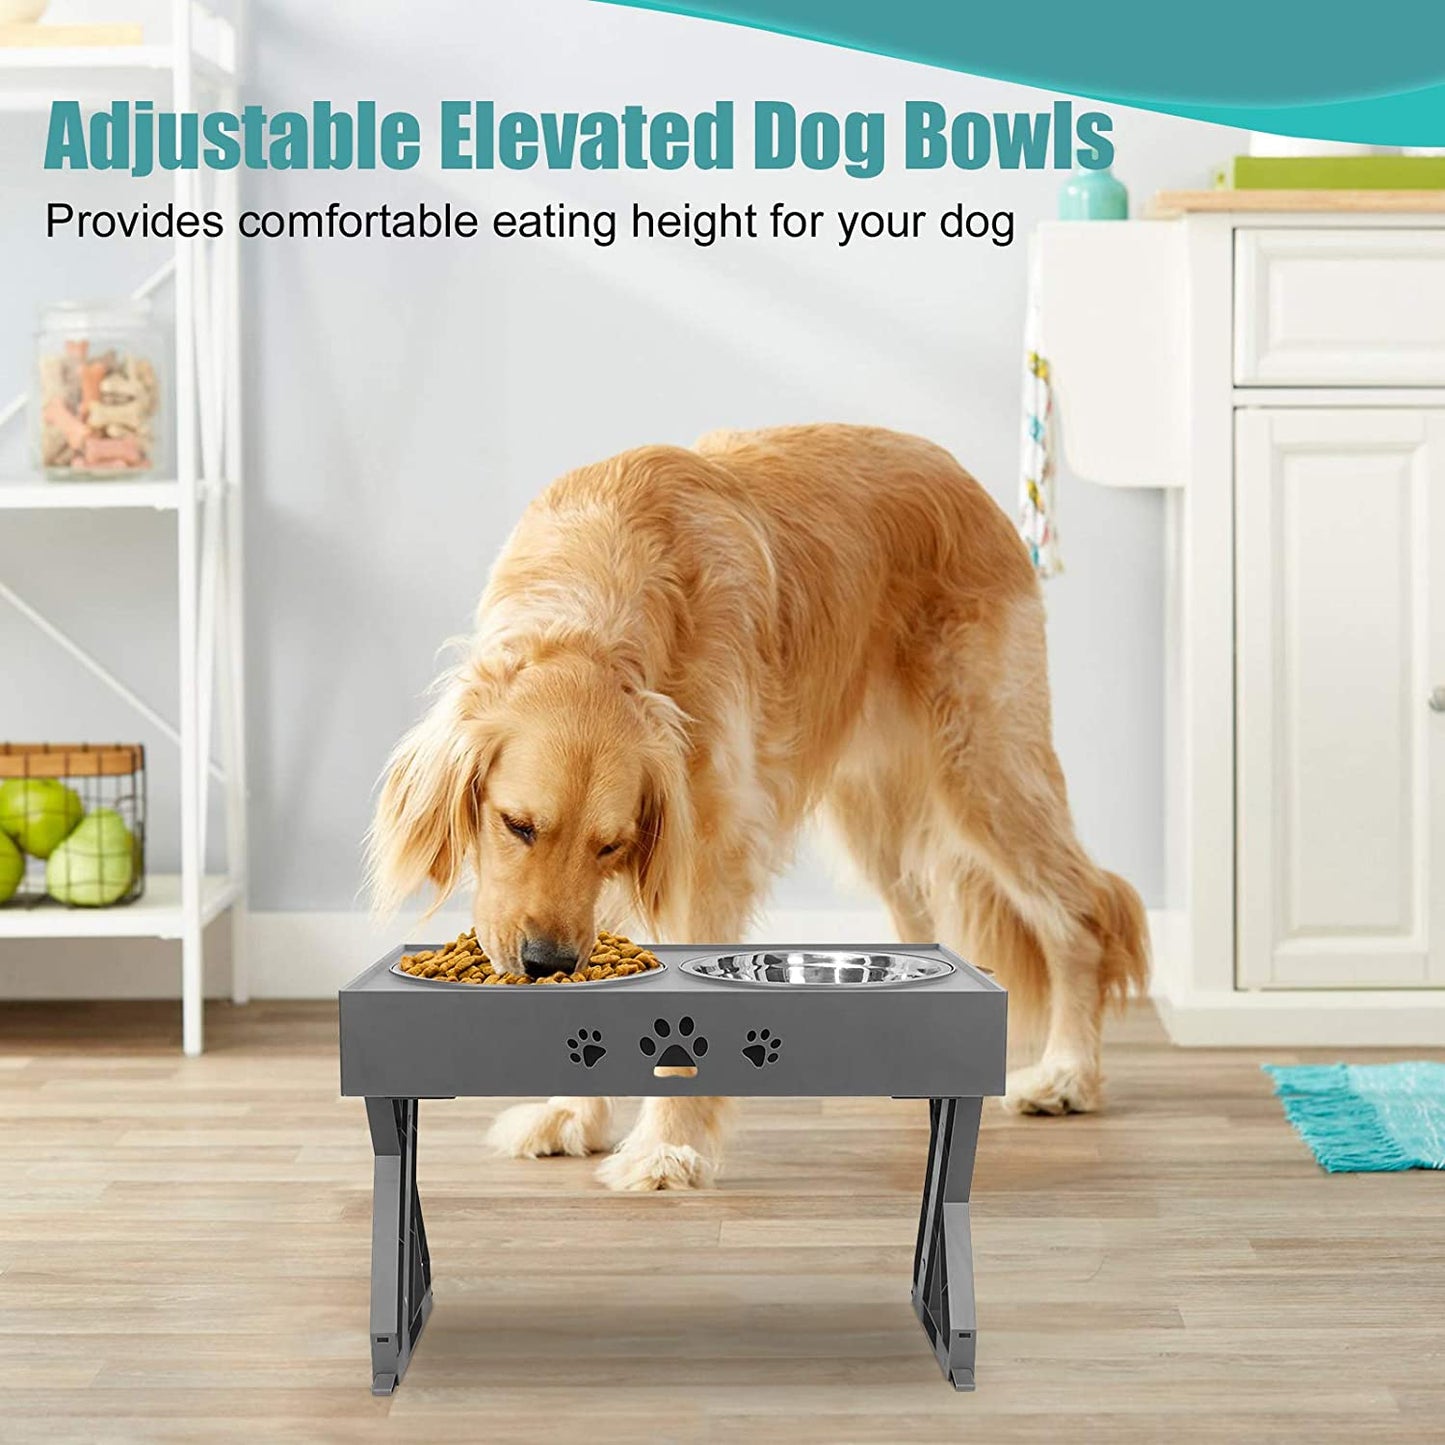 URPOWER Elevated Dog Bowls Adjustable Raised Dog Bowl with 2 Stainless Steel 1.5L Dog Food Bowls Stand Non-Slip No Spill Dog Dish Adjusts to 3 Heights 2.8”, 8”, 12”For Small Medium Large Dogs and Cats